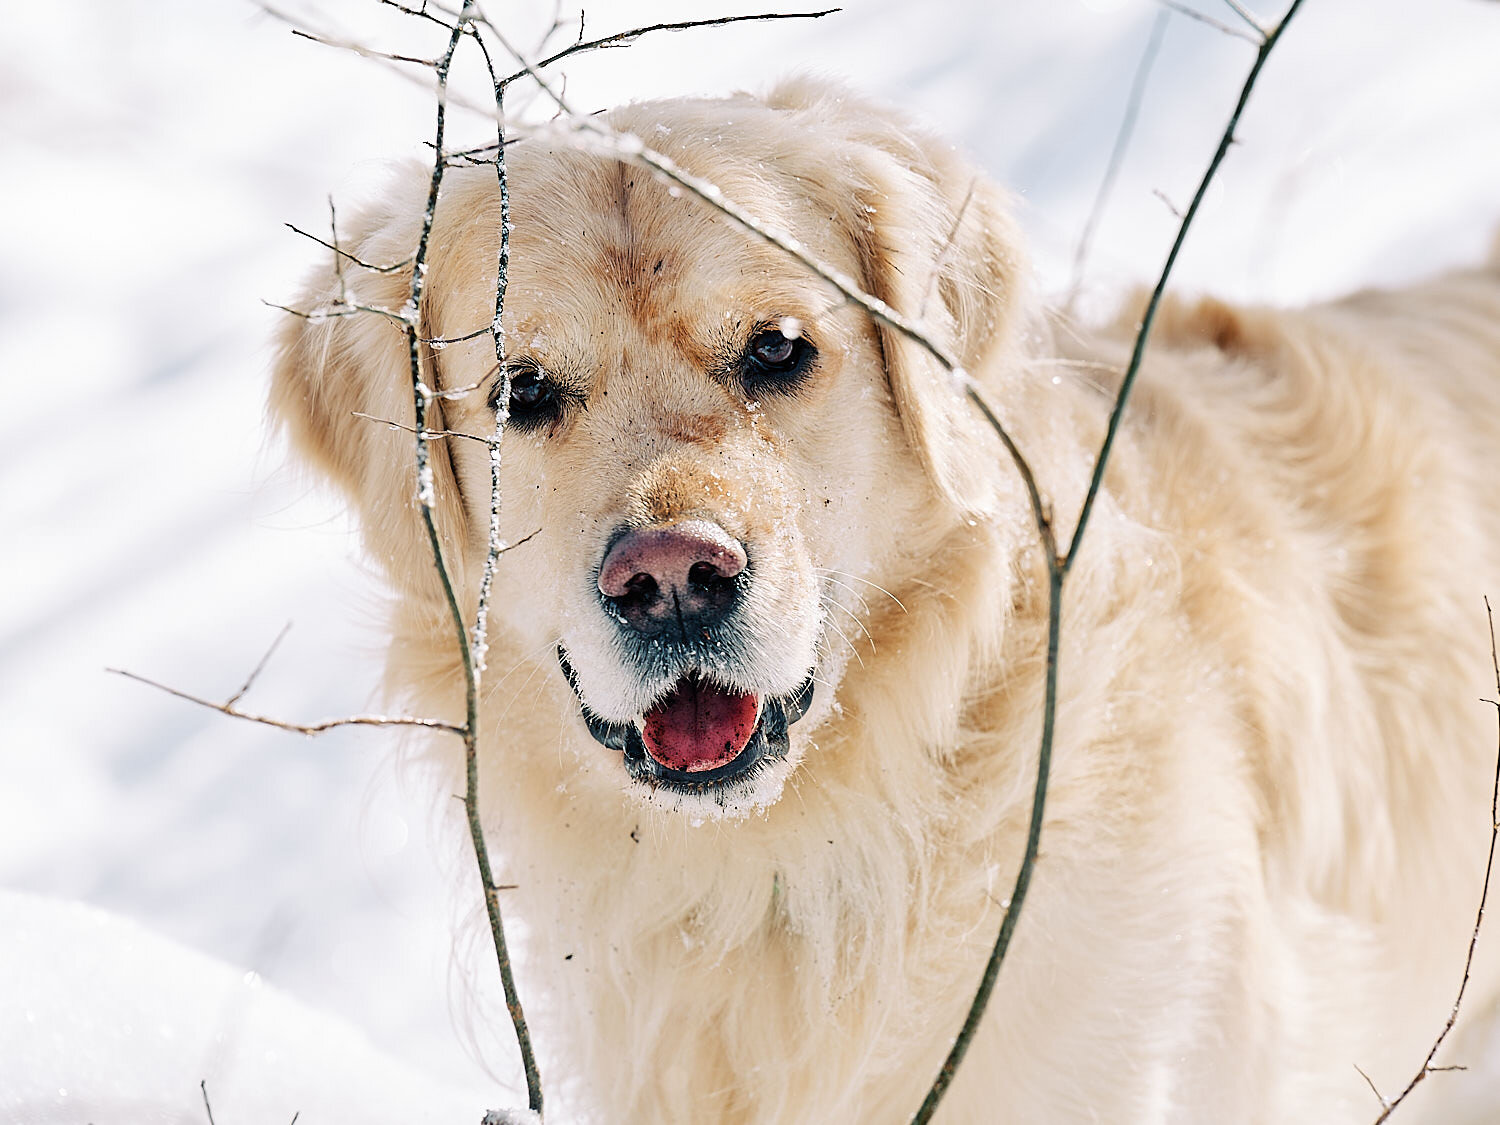  Joyka the Golden retriever dog is enjoying sunshine and snow on an extremely cold day in Western Pennsylvania. He is jumping for joy in the snow, catching icicles and snowflakes. All’s white and blue. 